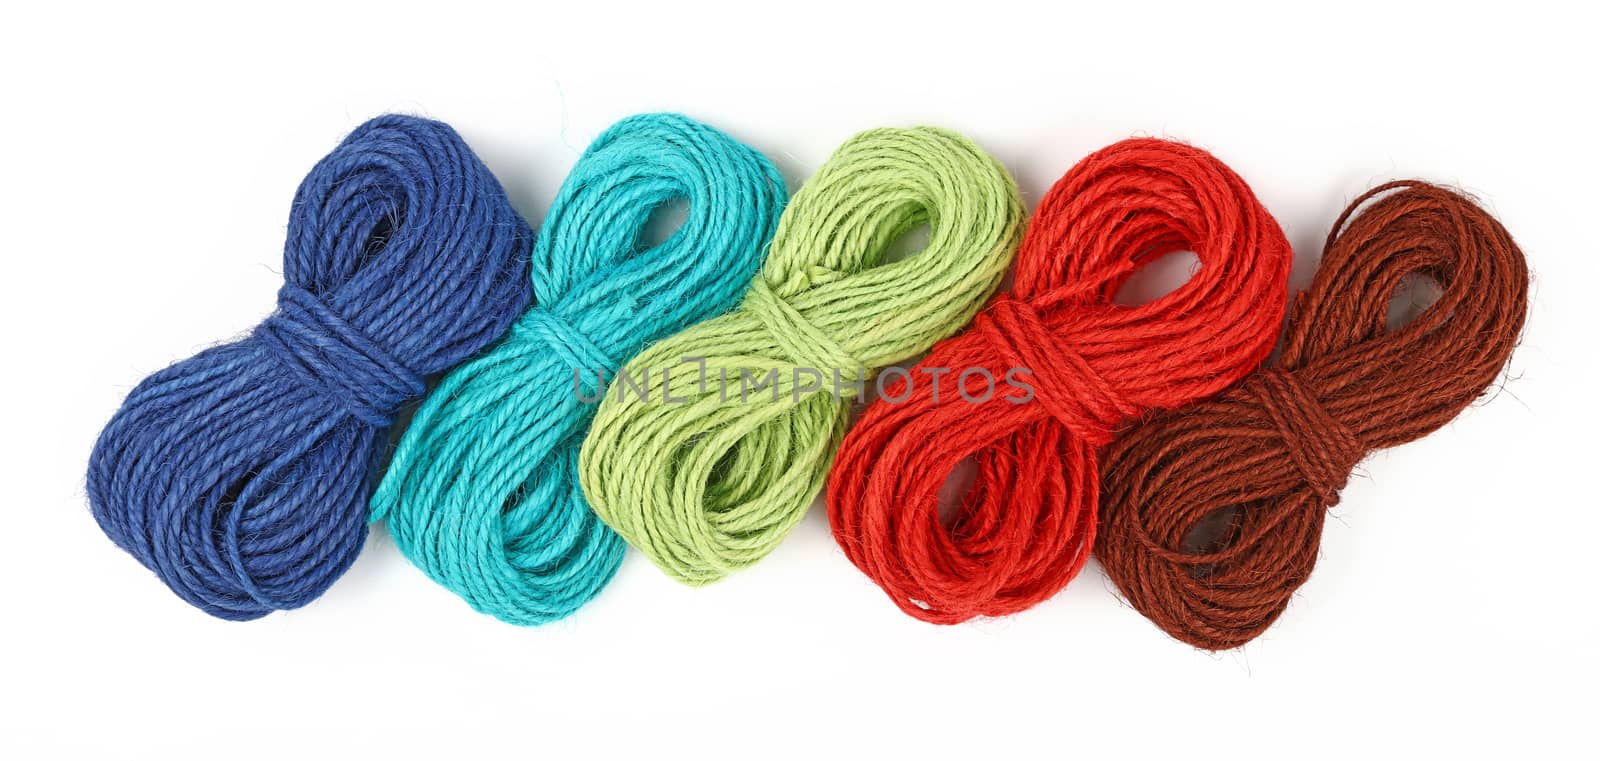 Range of jute twine coil skeins isolated on white by BreakingTheWalls